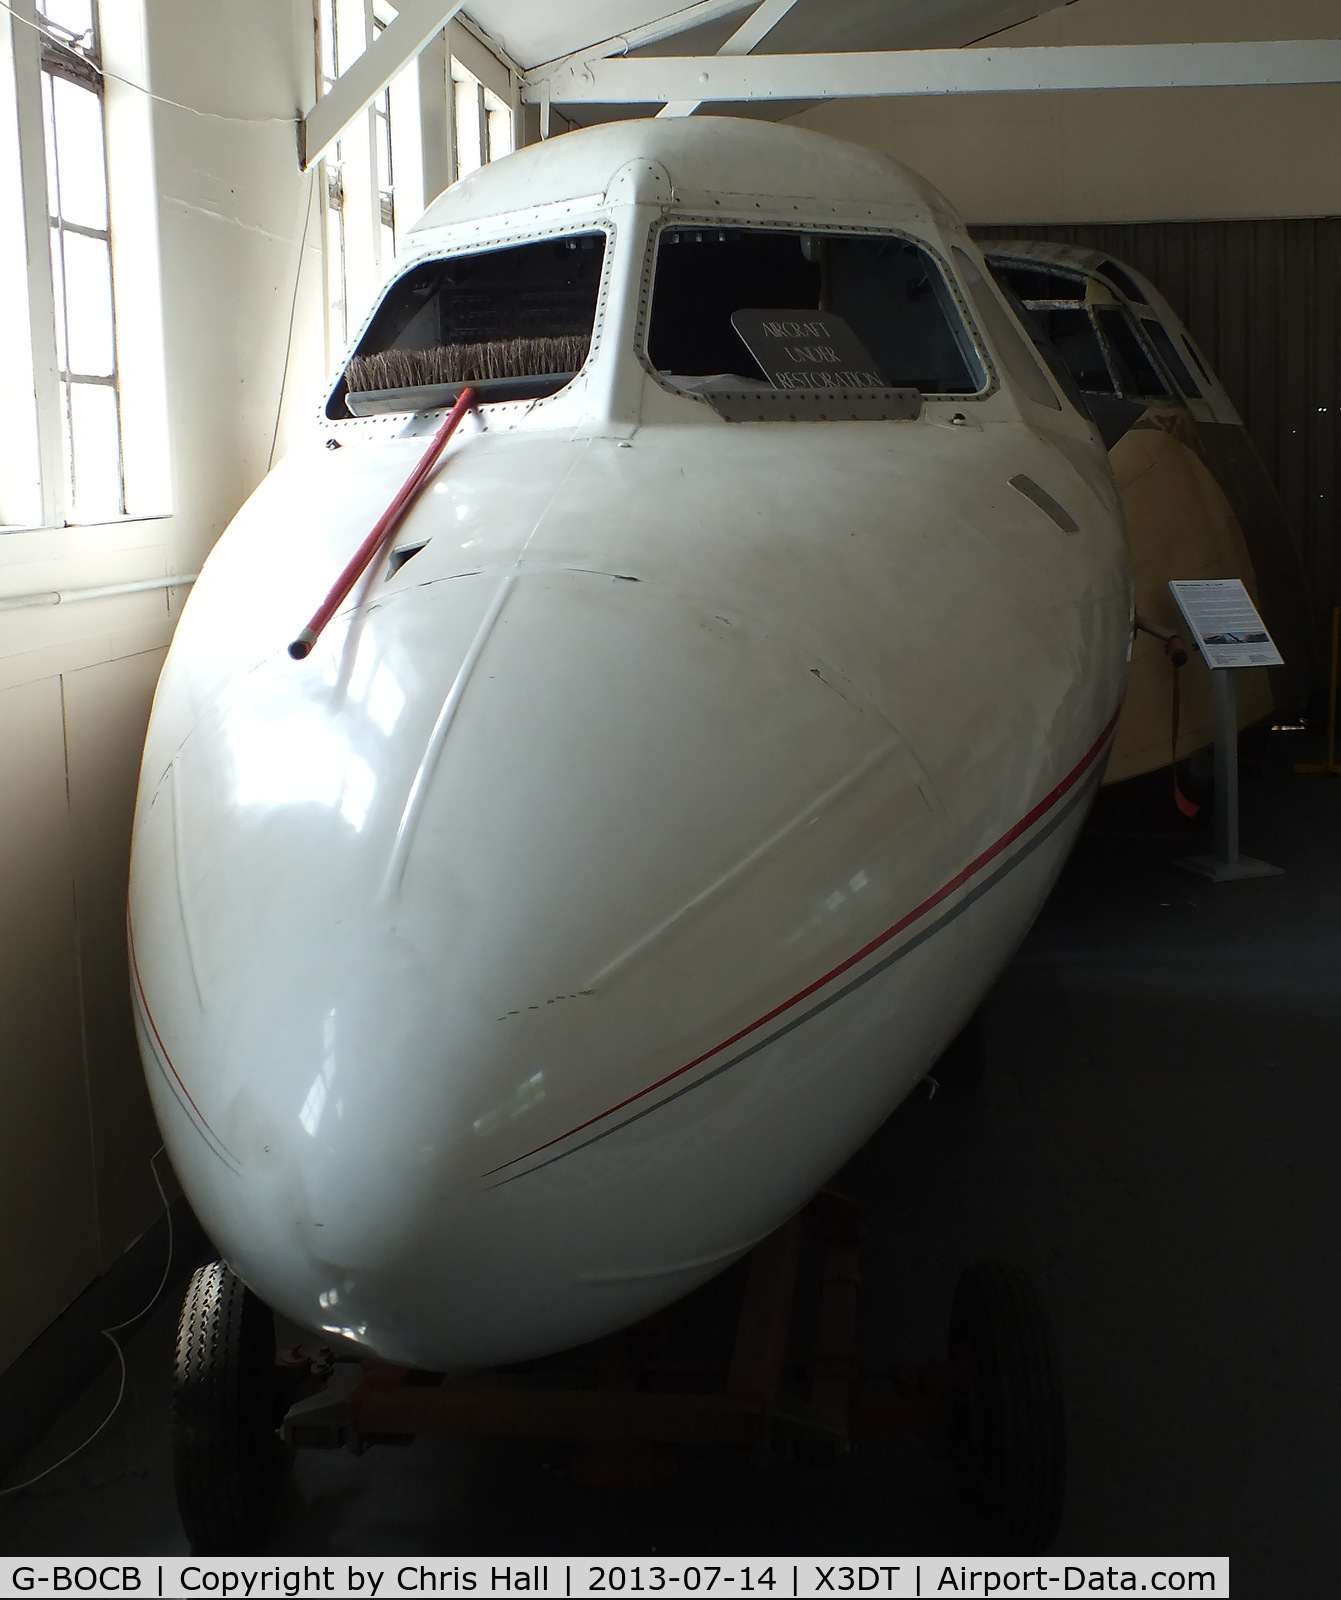 G-BOCB, 1966 Hawker Siddeley HS.125 Series 1B/522 C/N 25106, preserved at the South Yorkshire Aircraft Museum, AeroVenture, Doncaster